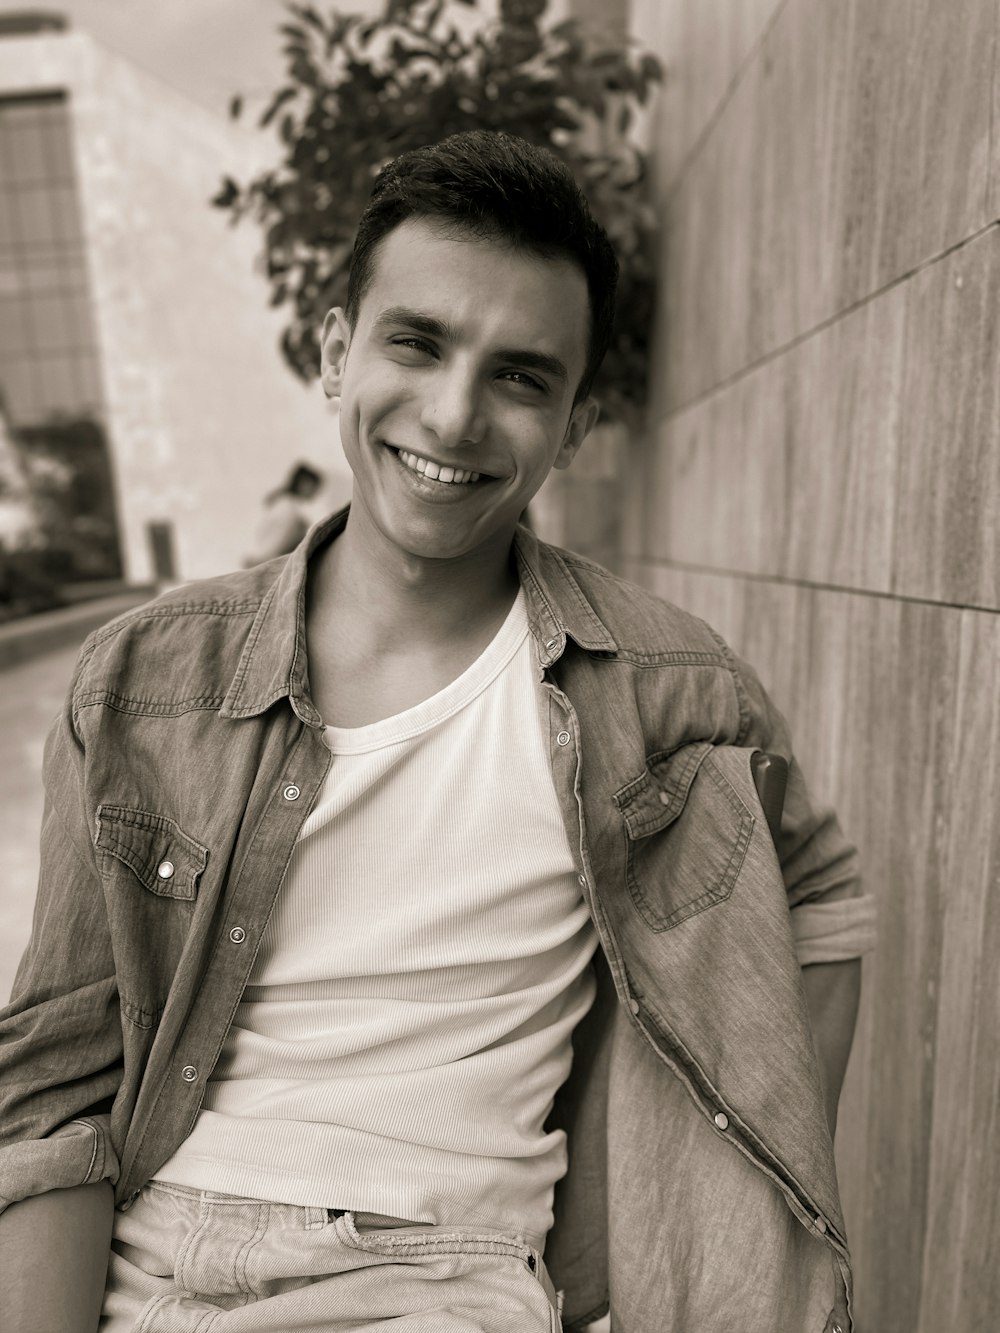 a man sitting on a bench smiling at the camera